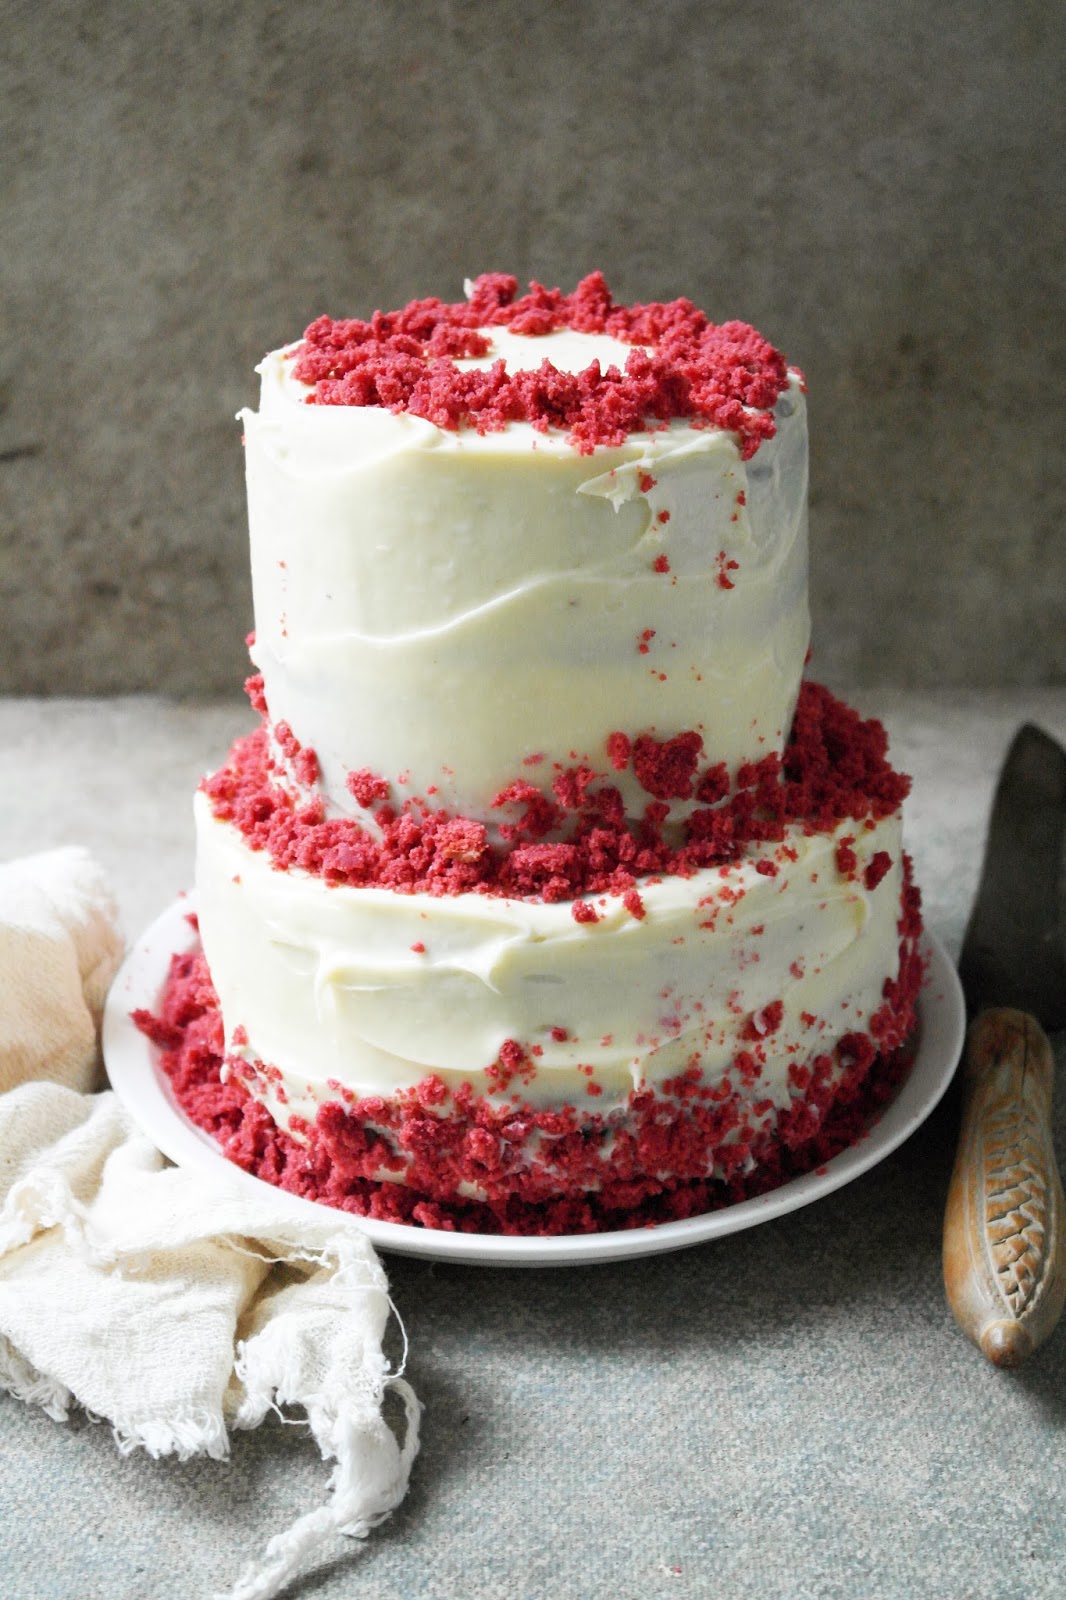 Red Velvet Cake with White Chocolate Cream Cheese Frosting